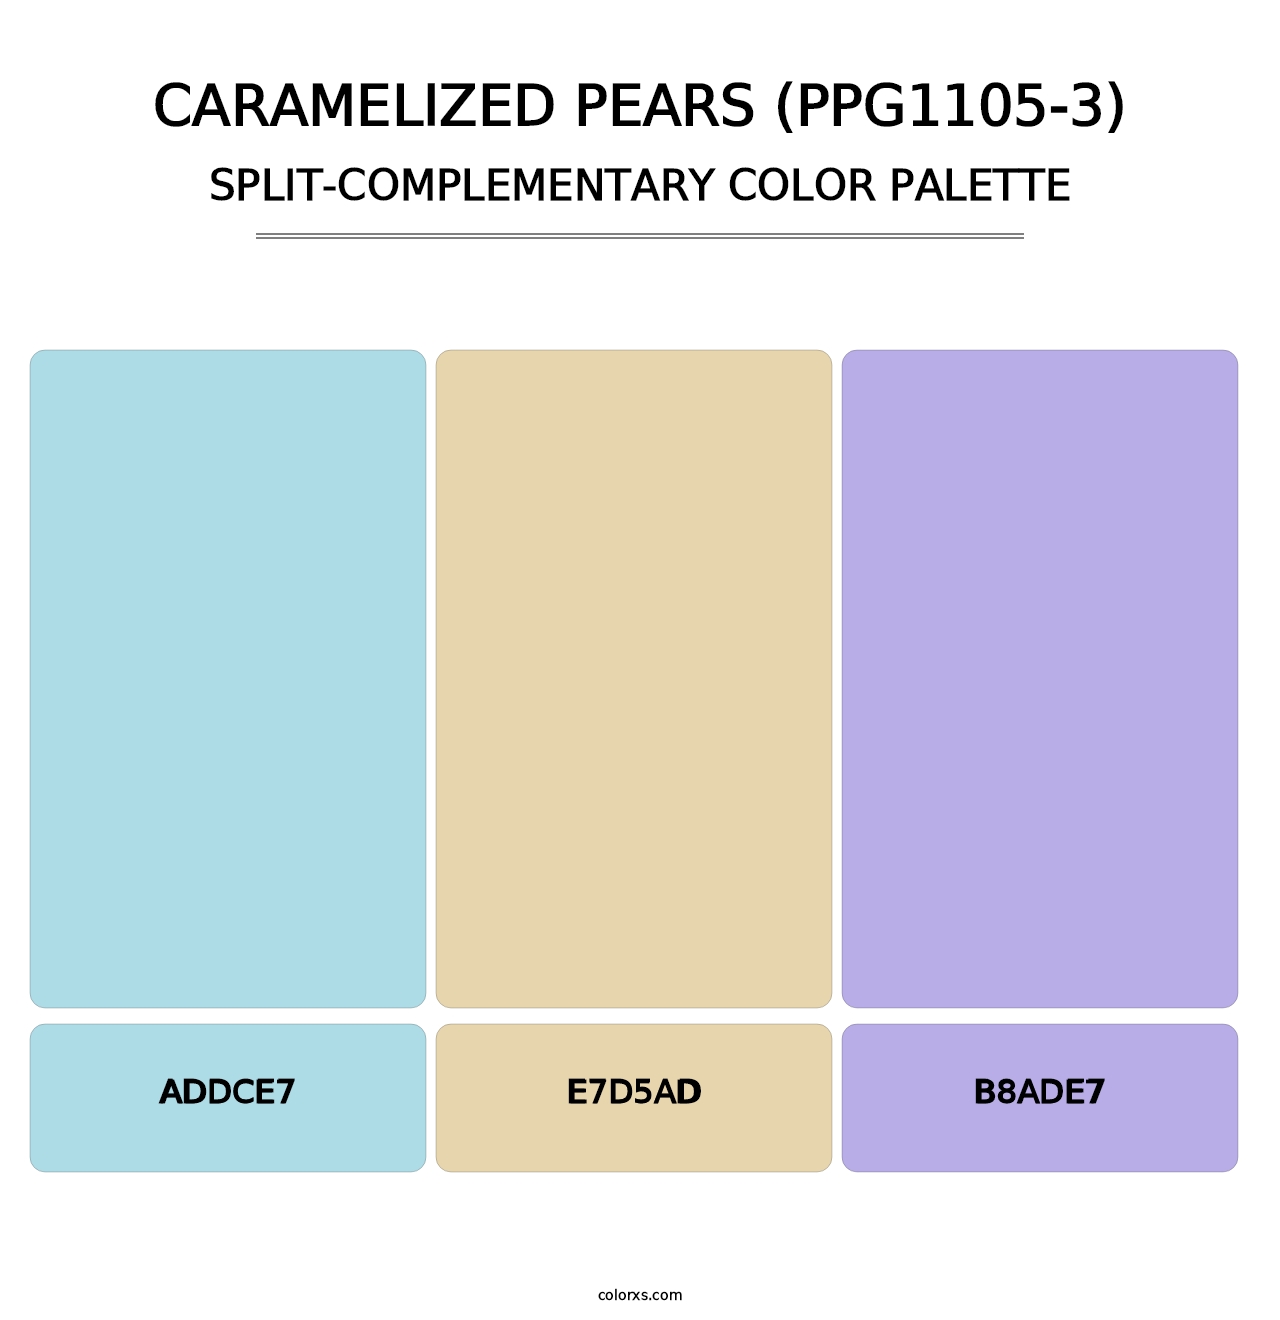 Caramelized Pears (PPG1105-3) - Split-Complementary Color Palette